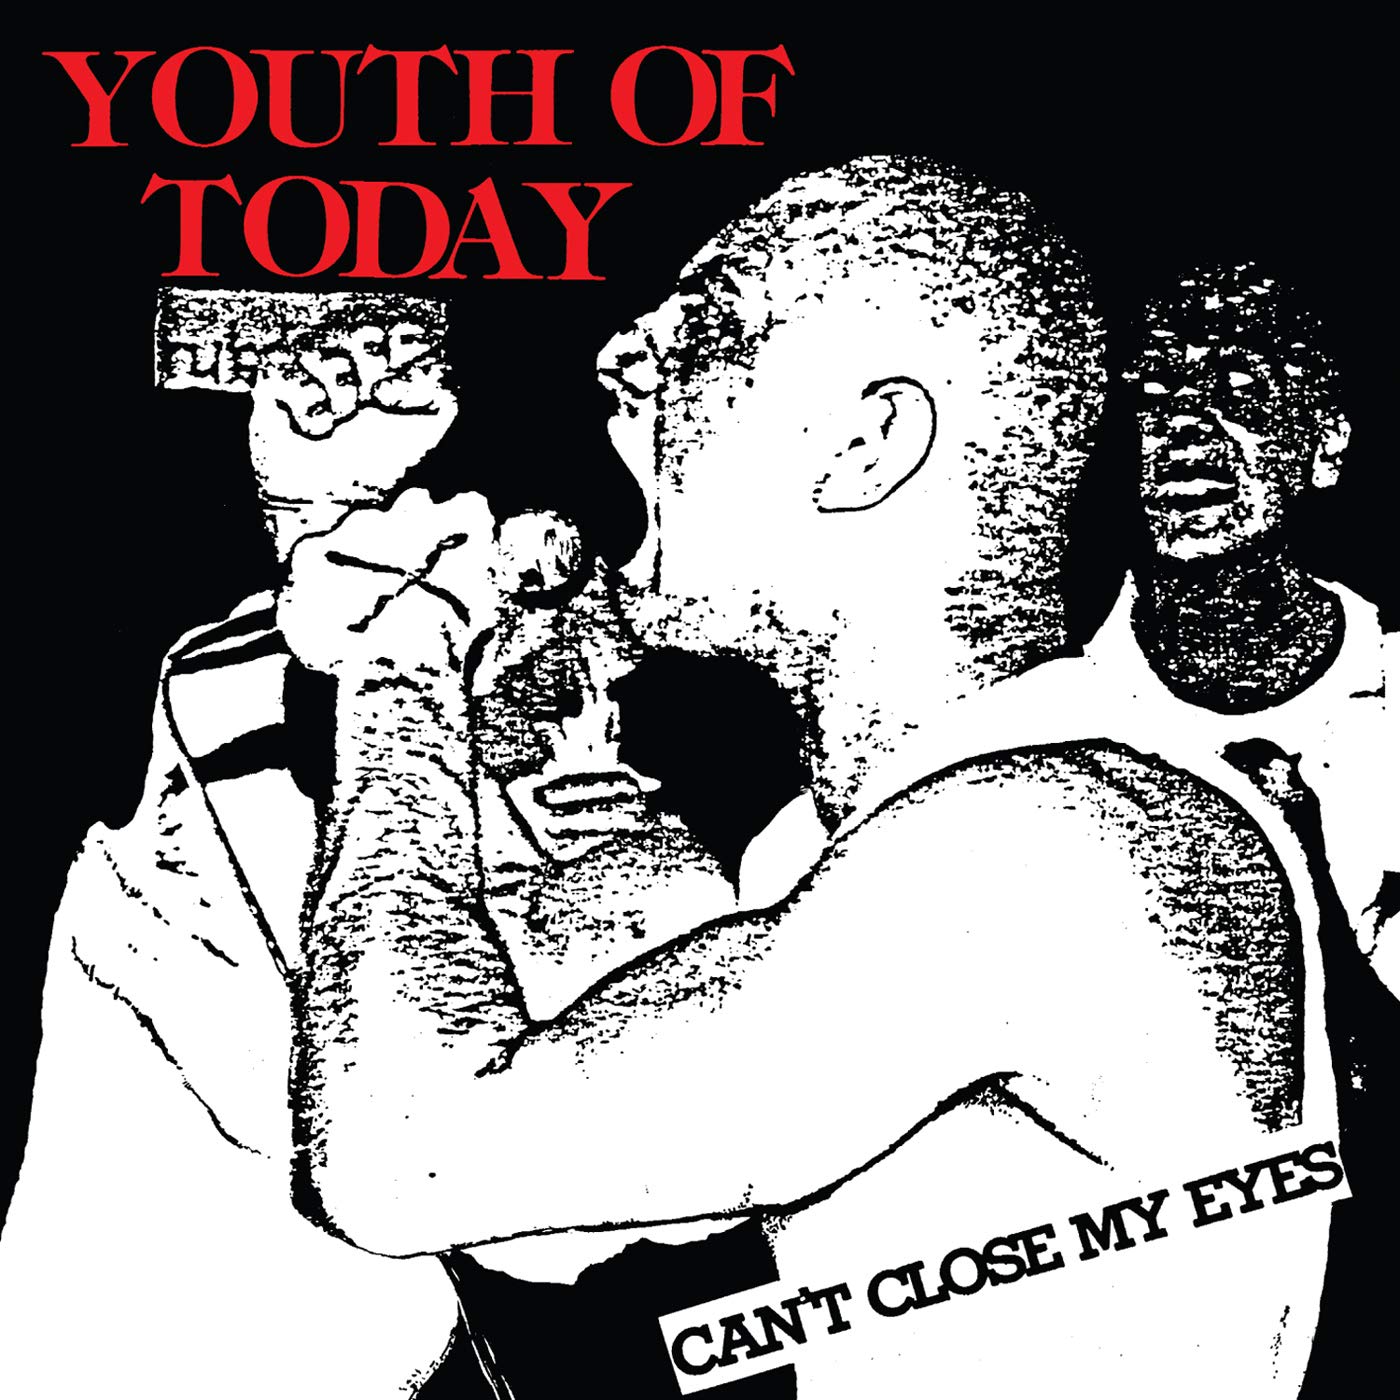 YOUTH OF TODAY "Can't Close My Eyes" LP